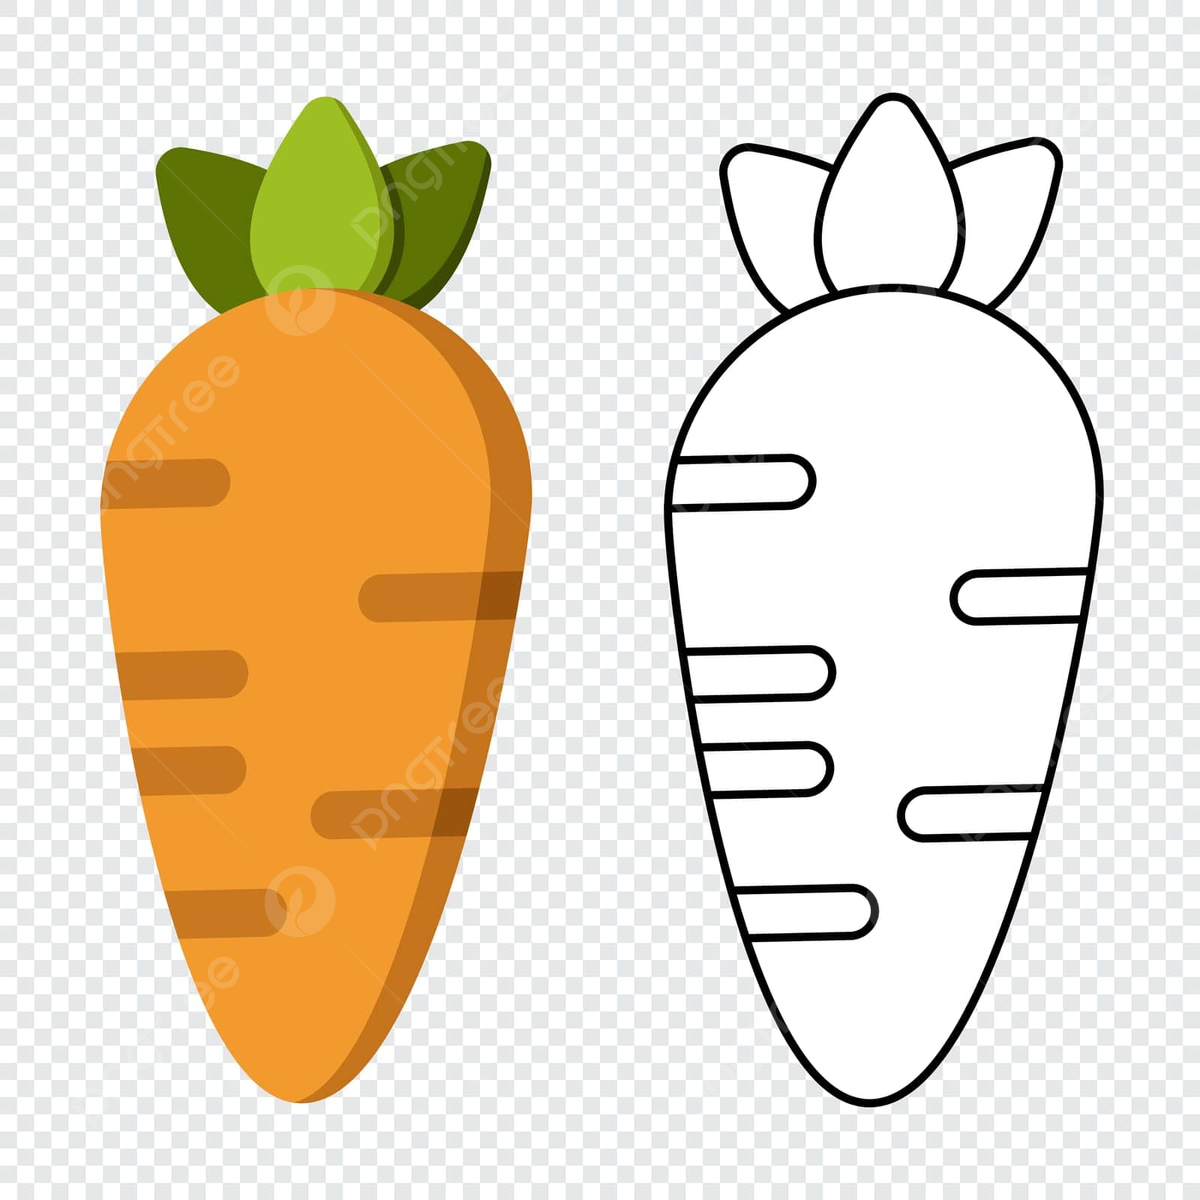 Juicy carrot coloring book for kids educating about fruits and vegetables vector cat drawing car drawing book drawing png and vector with transparent background for free download